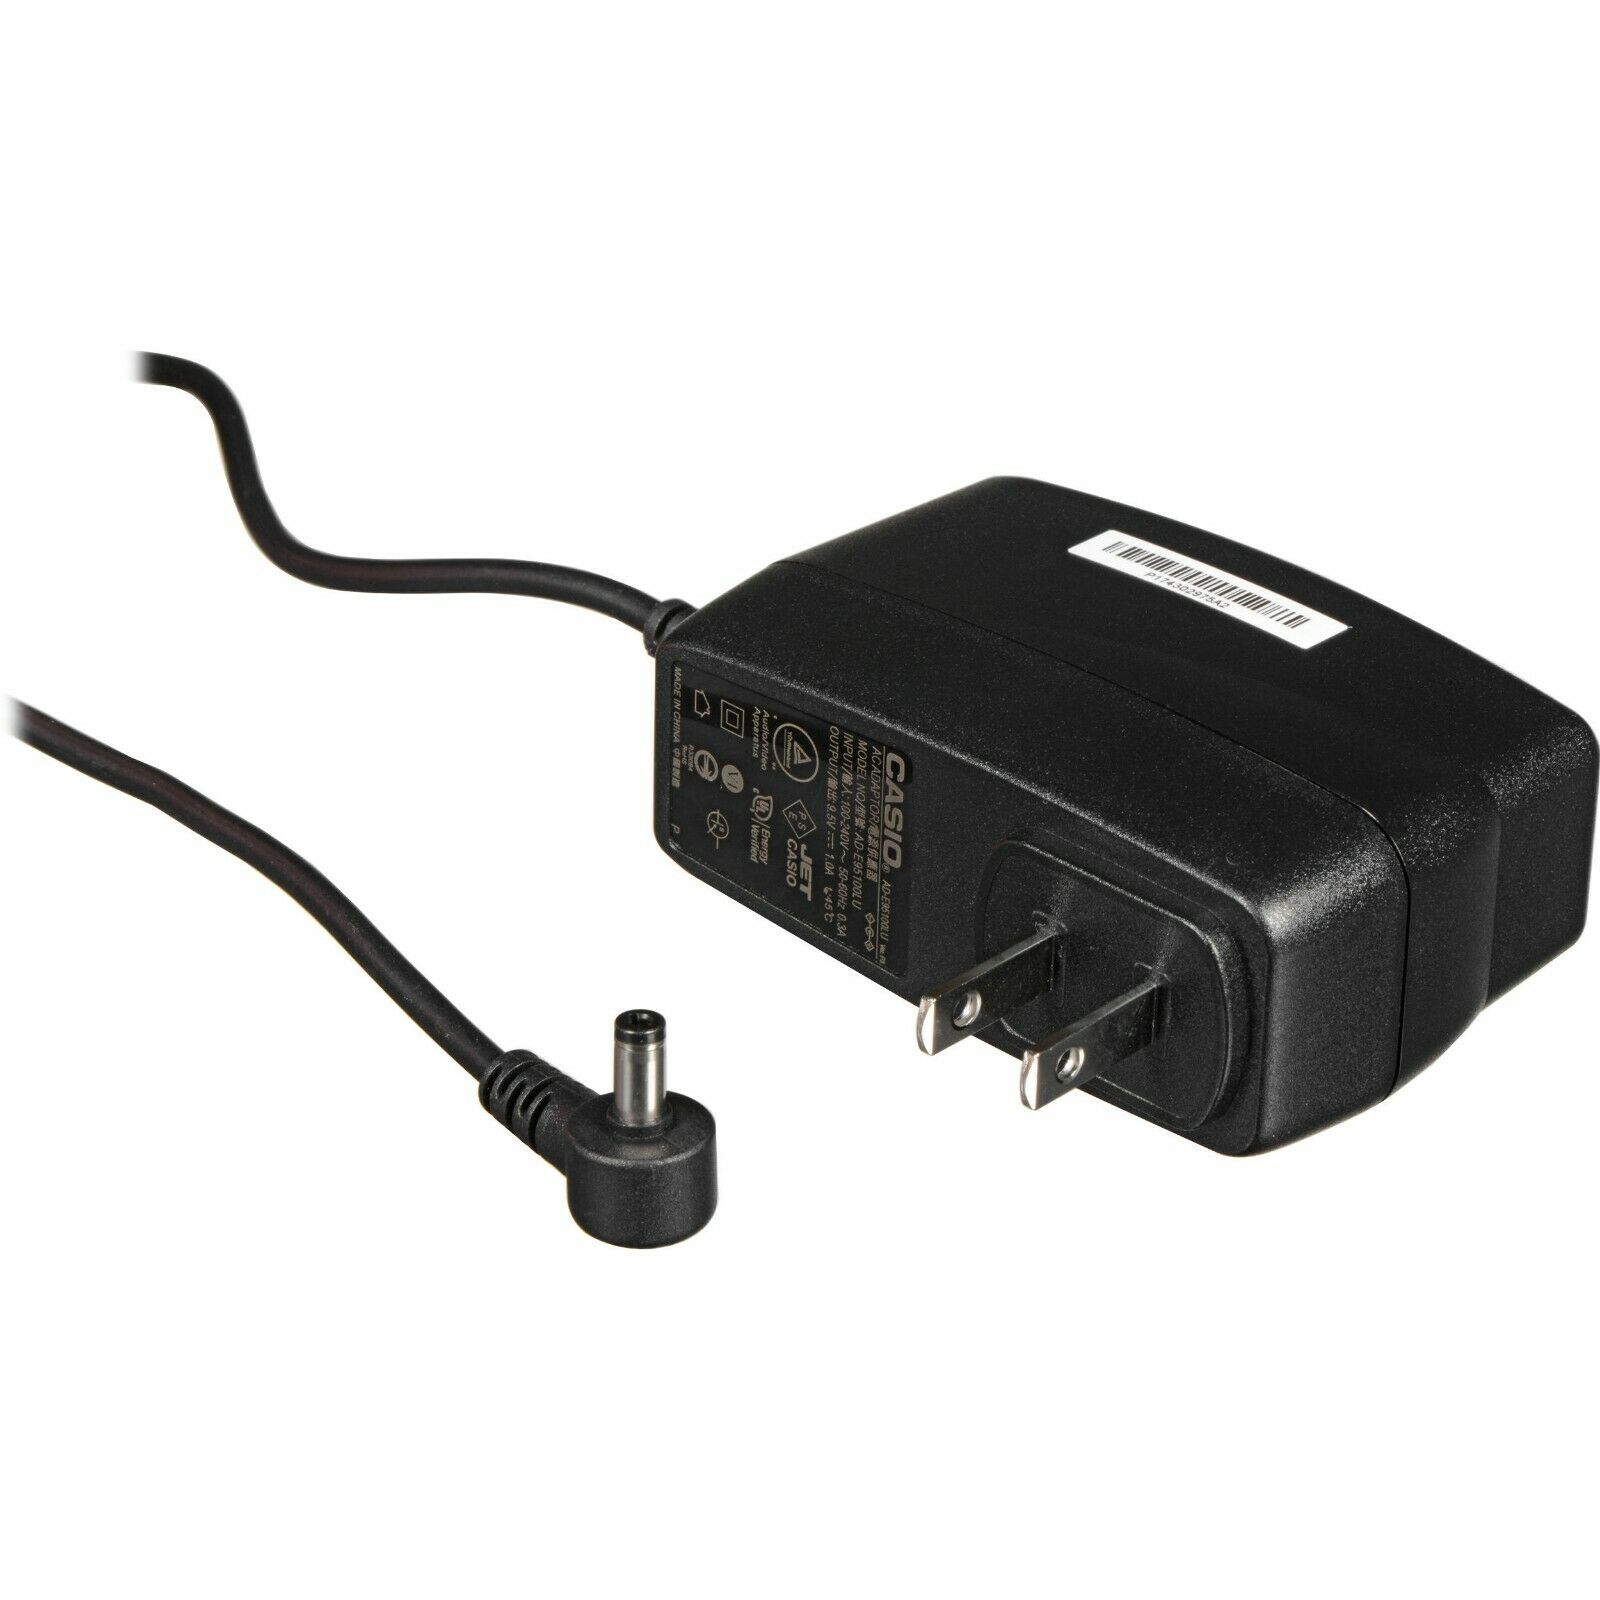 34V 600mA Charger for Vax Blade TBT3V1B1 32V CordlessPro Stick Vacuum Cleaner Type: Power Adapter MPN: WILLIAM13B+C/D W